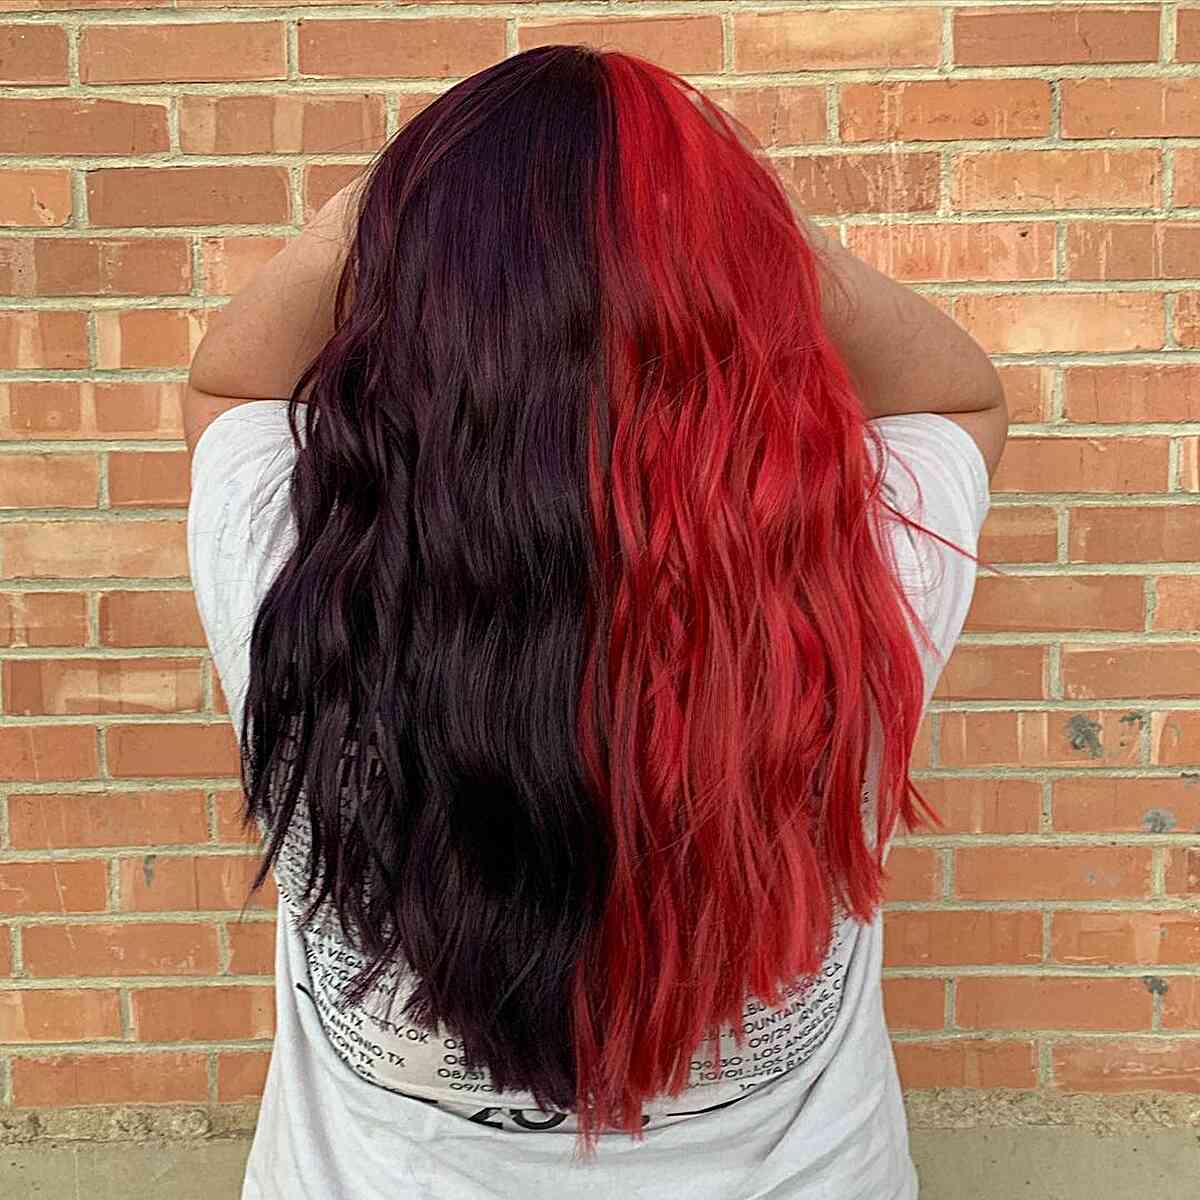 Bright Red and Dark Burgundy V-Shaped Hair with Waist-Grazing Length